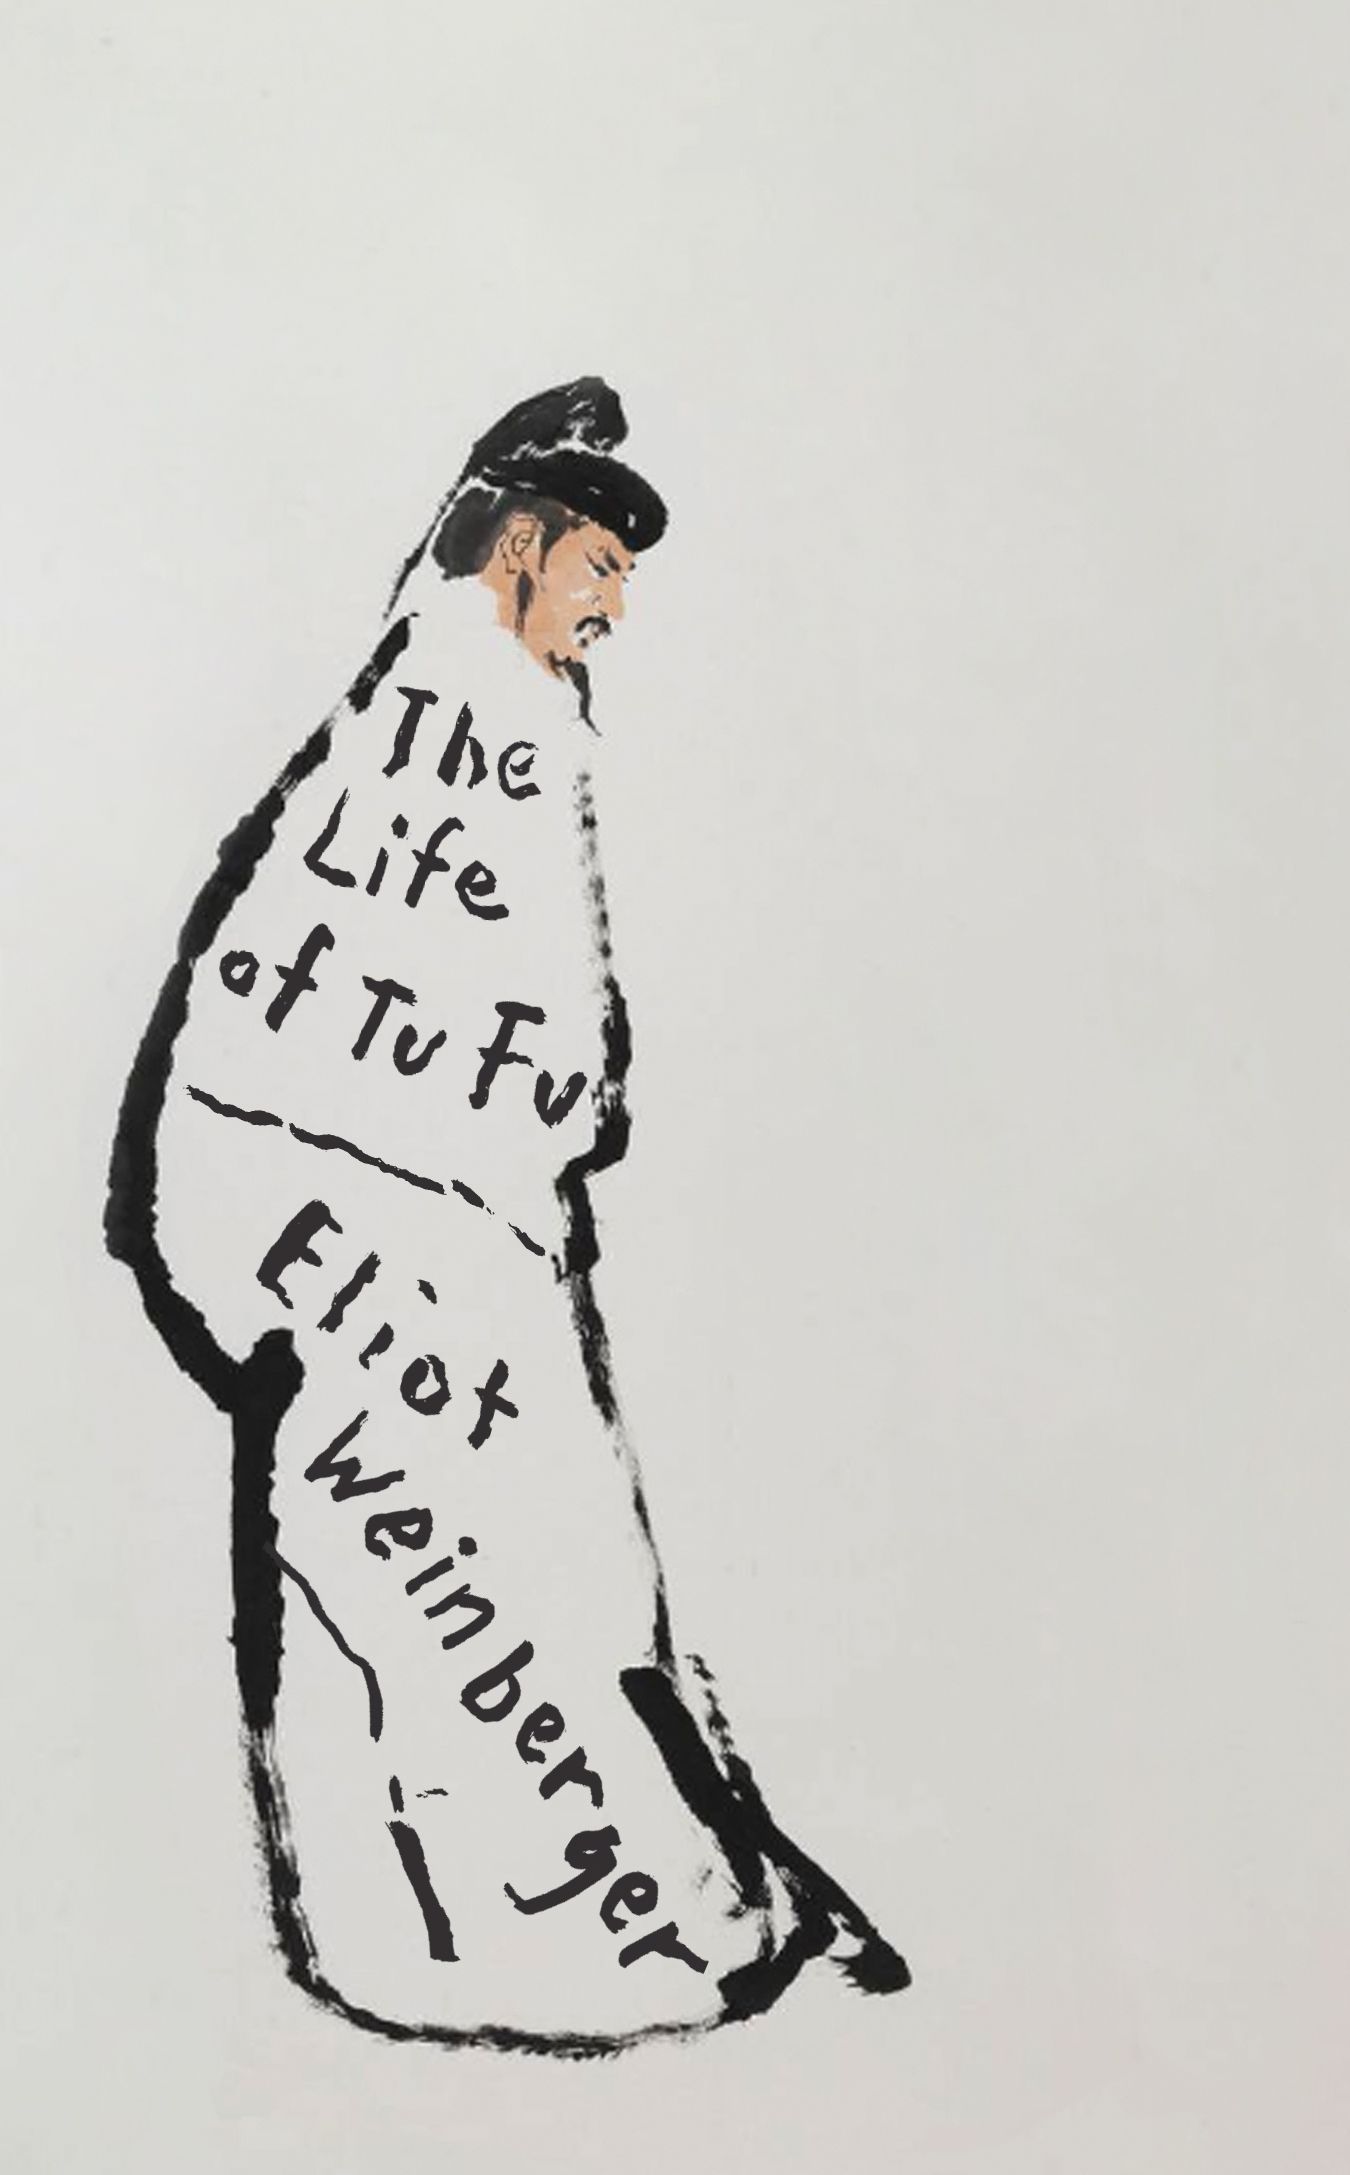 The Life of You Too? On Eliot Weinberger’s “The Life of Tu Fu”